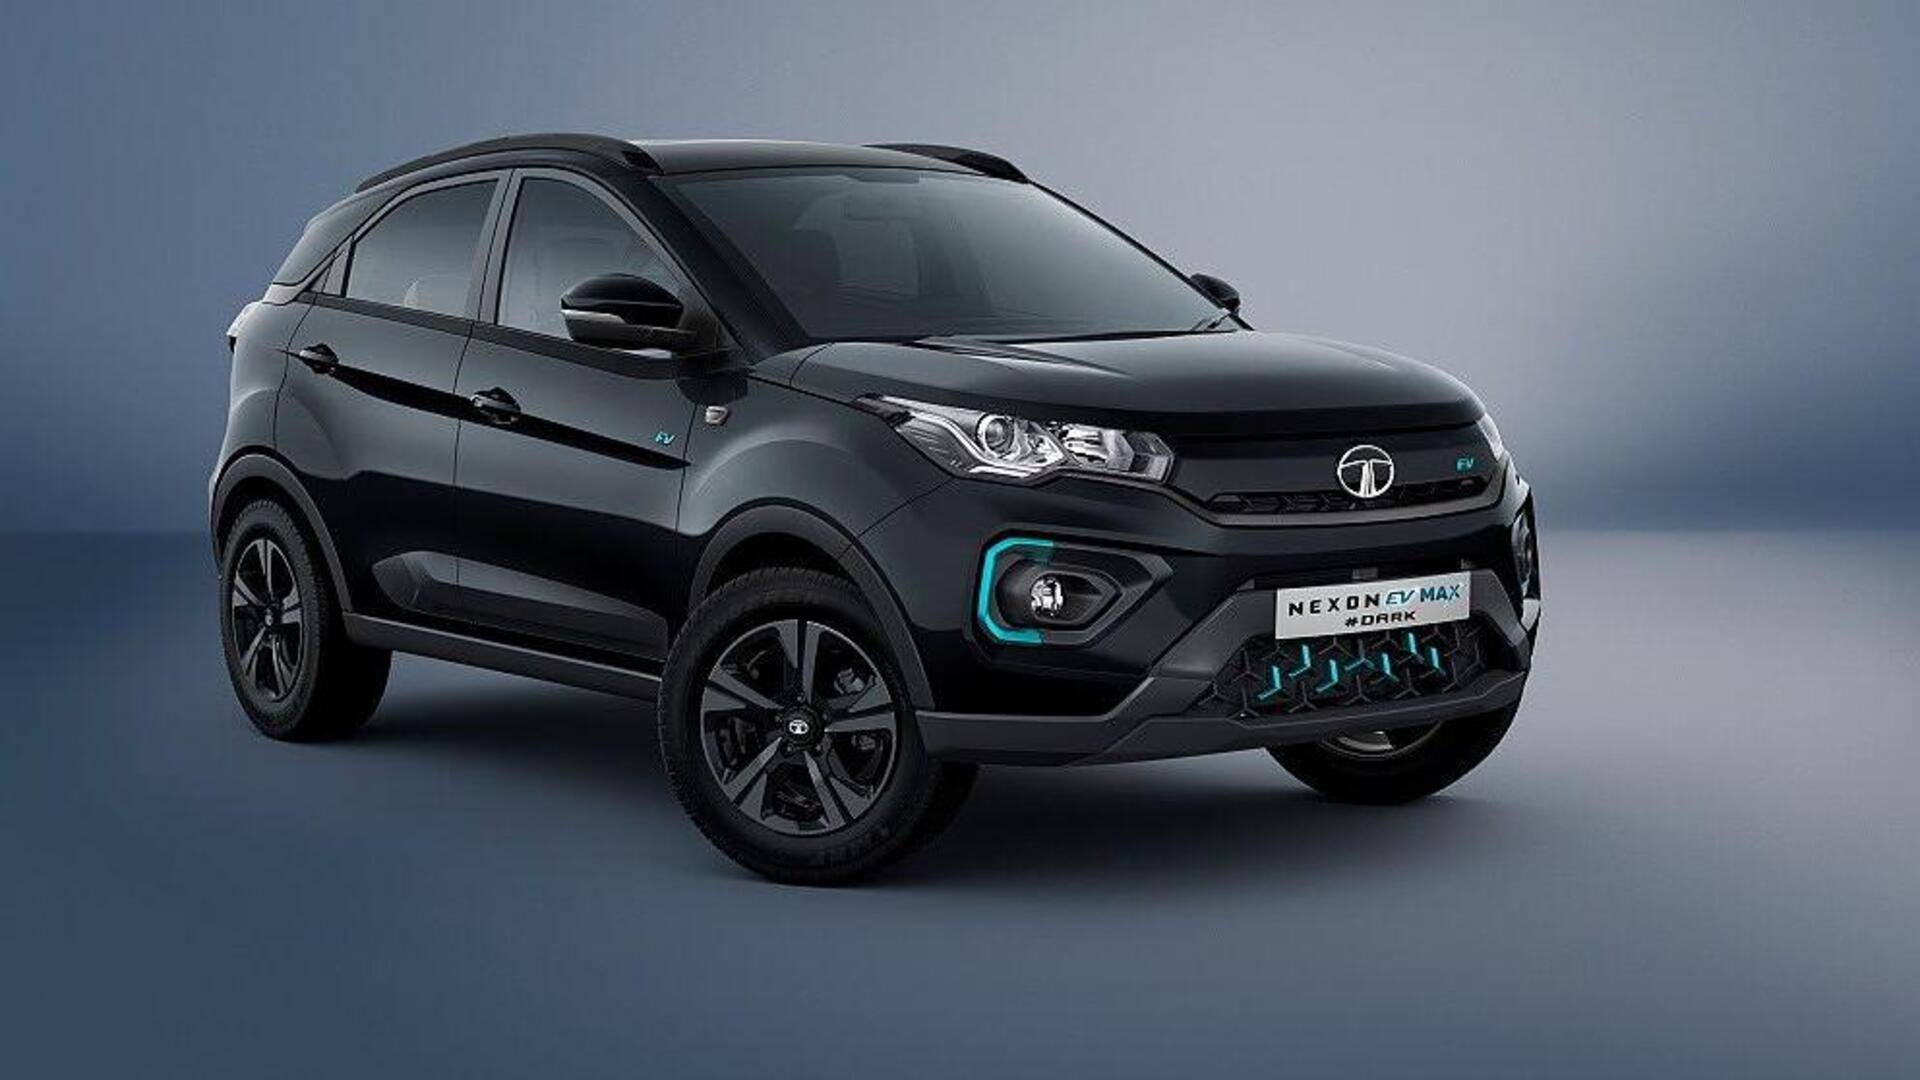 Tata Nexon EV Max, Prime offered with Rs. 2.6L discounts